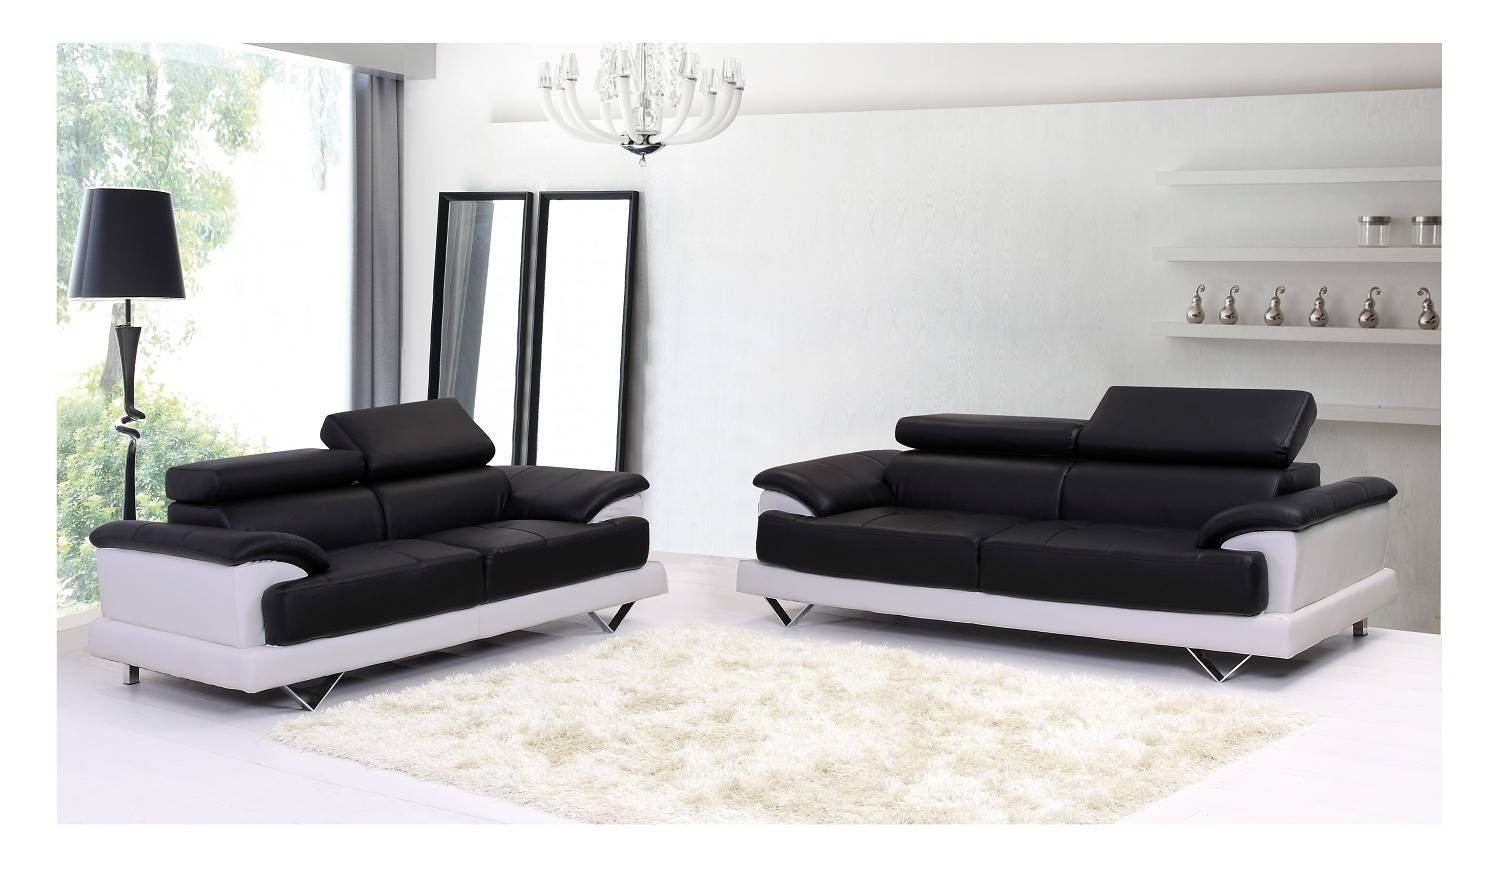 Cosmo Black And White Leather 3 And 2 Seater Leather Sofas Inside Black And White Leather Sofas (View 1 of 15)